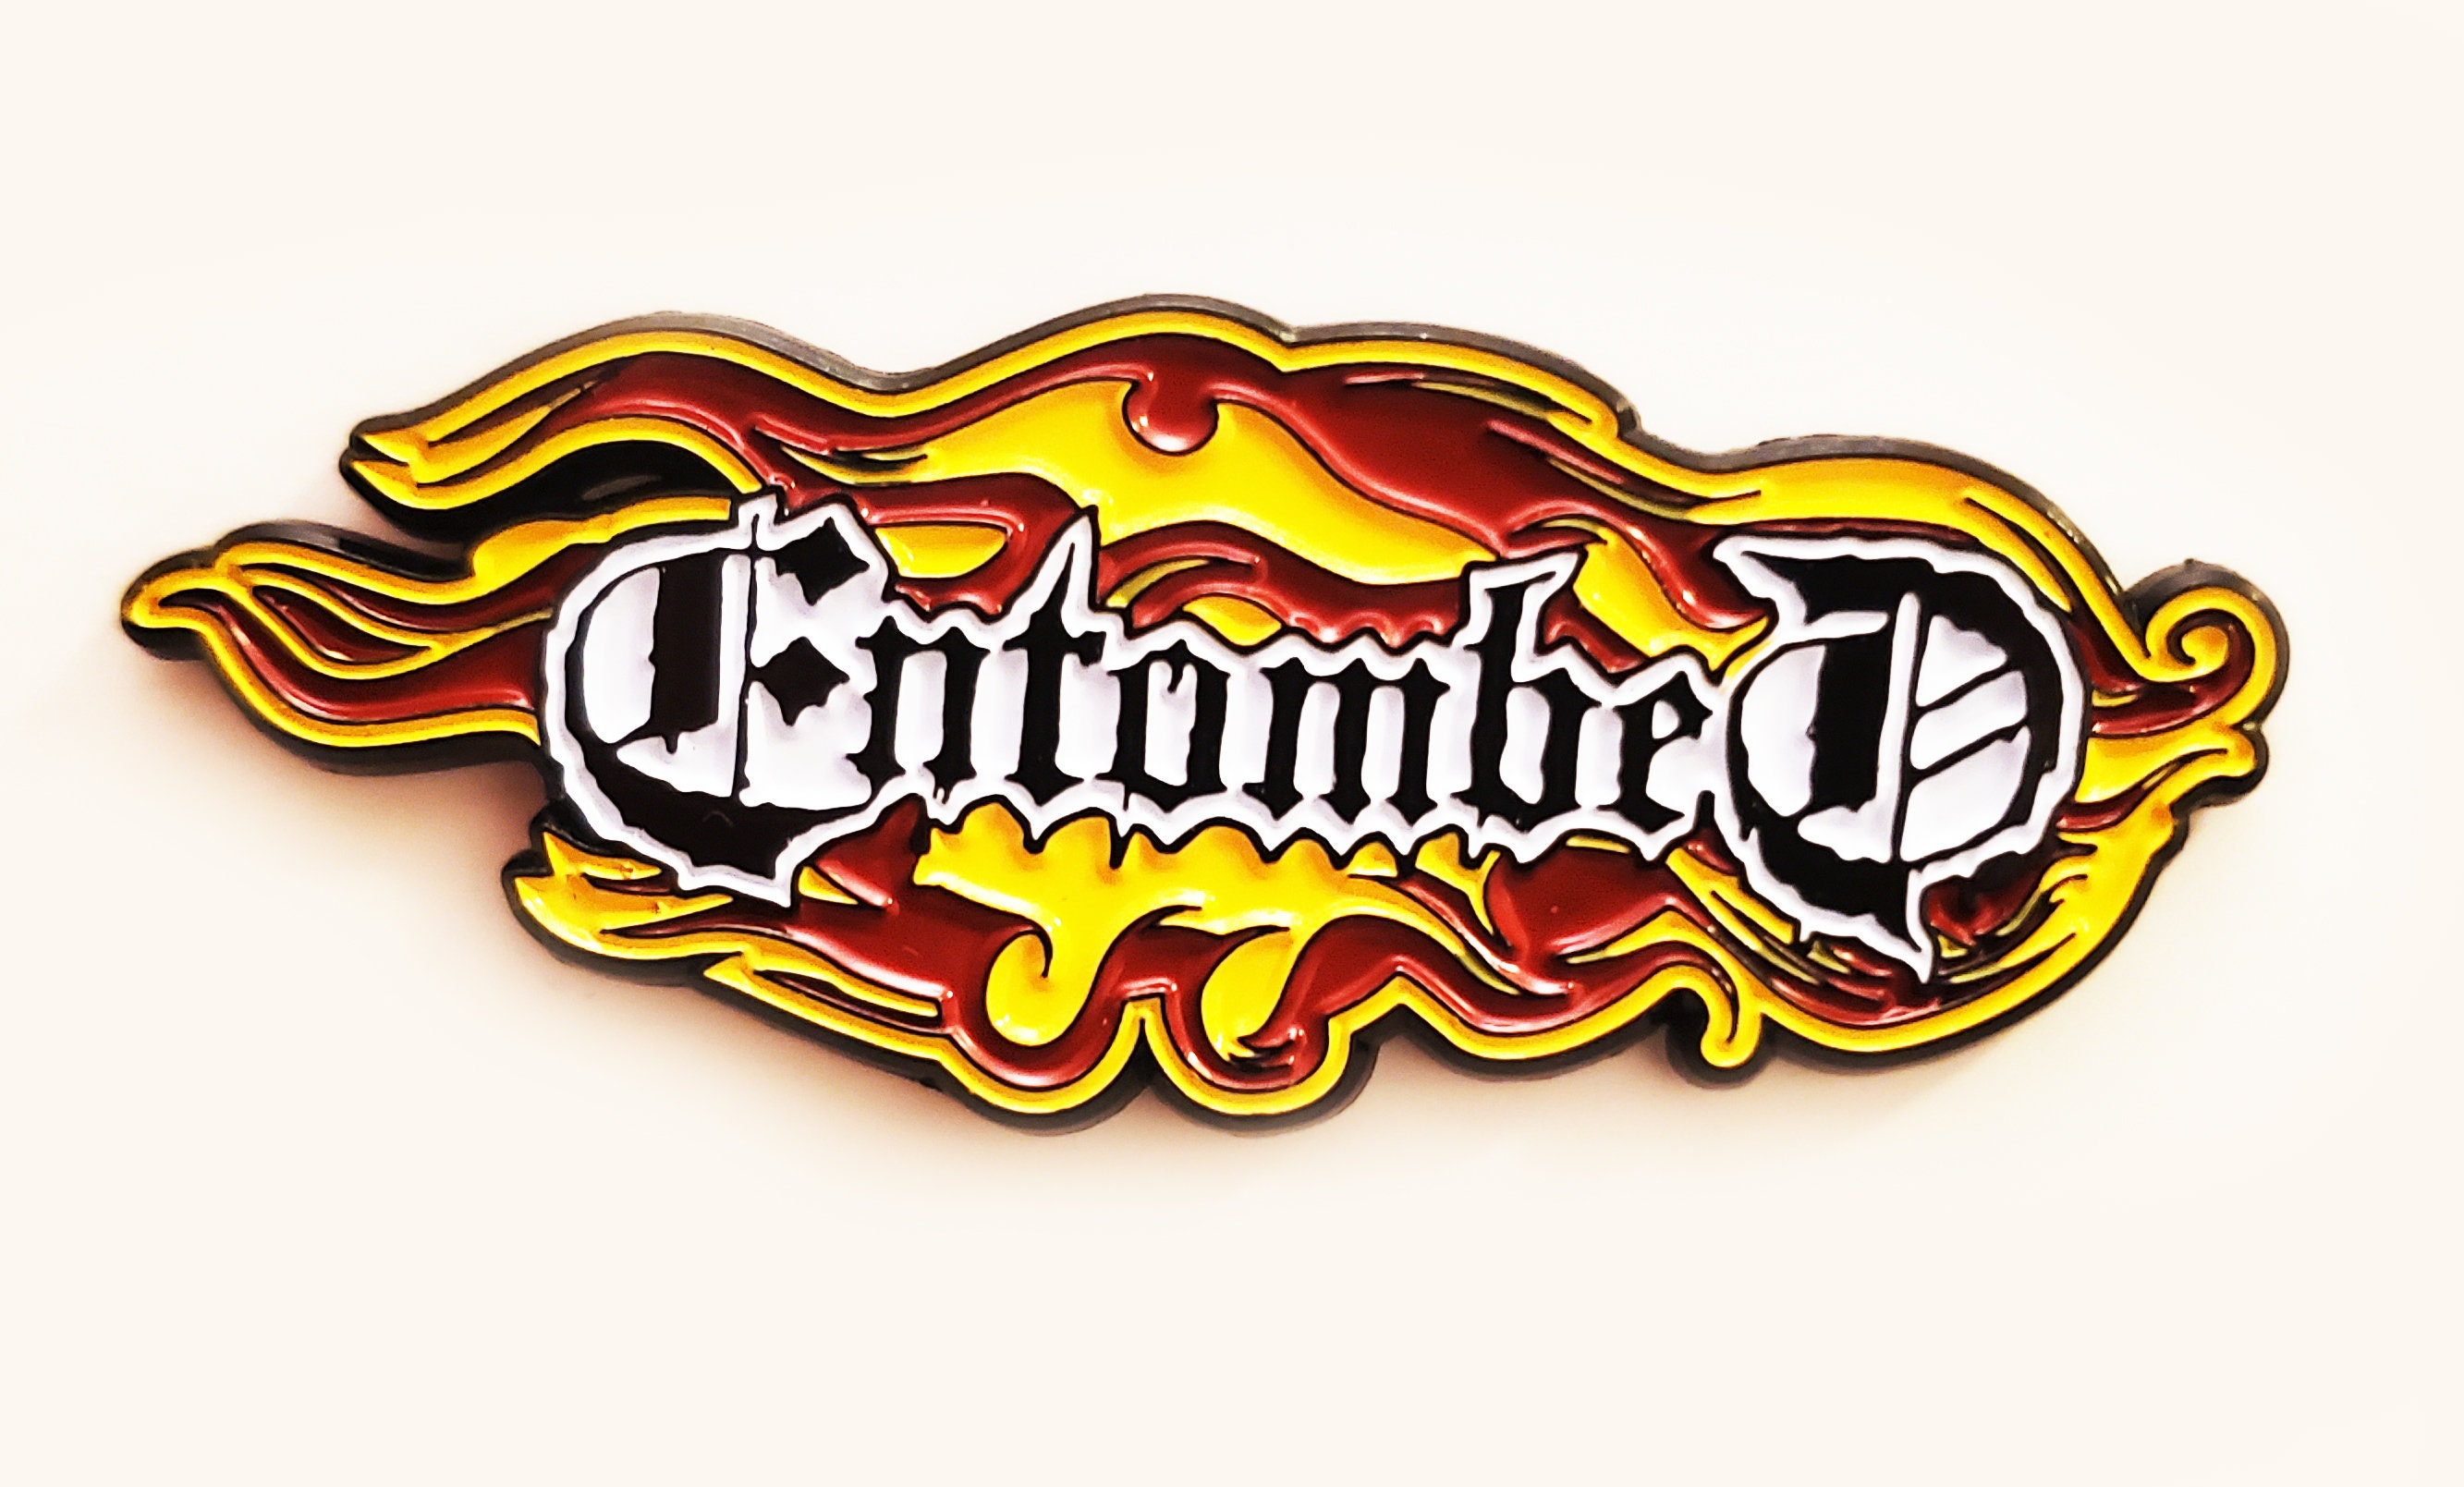 ENTOMBED,LEFT HAND PATH,SEW ON SUBLIMATED LARGE BACK PATCH 